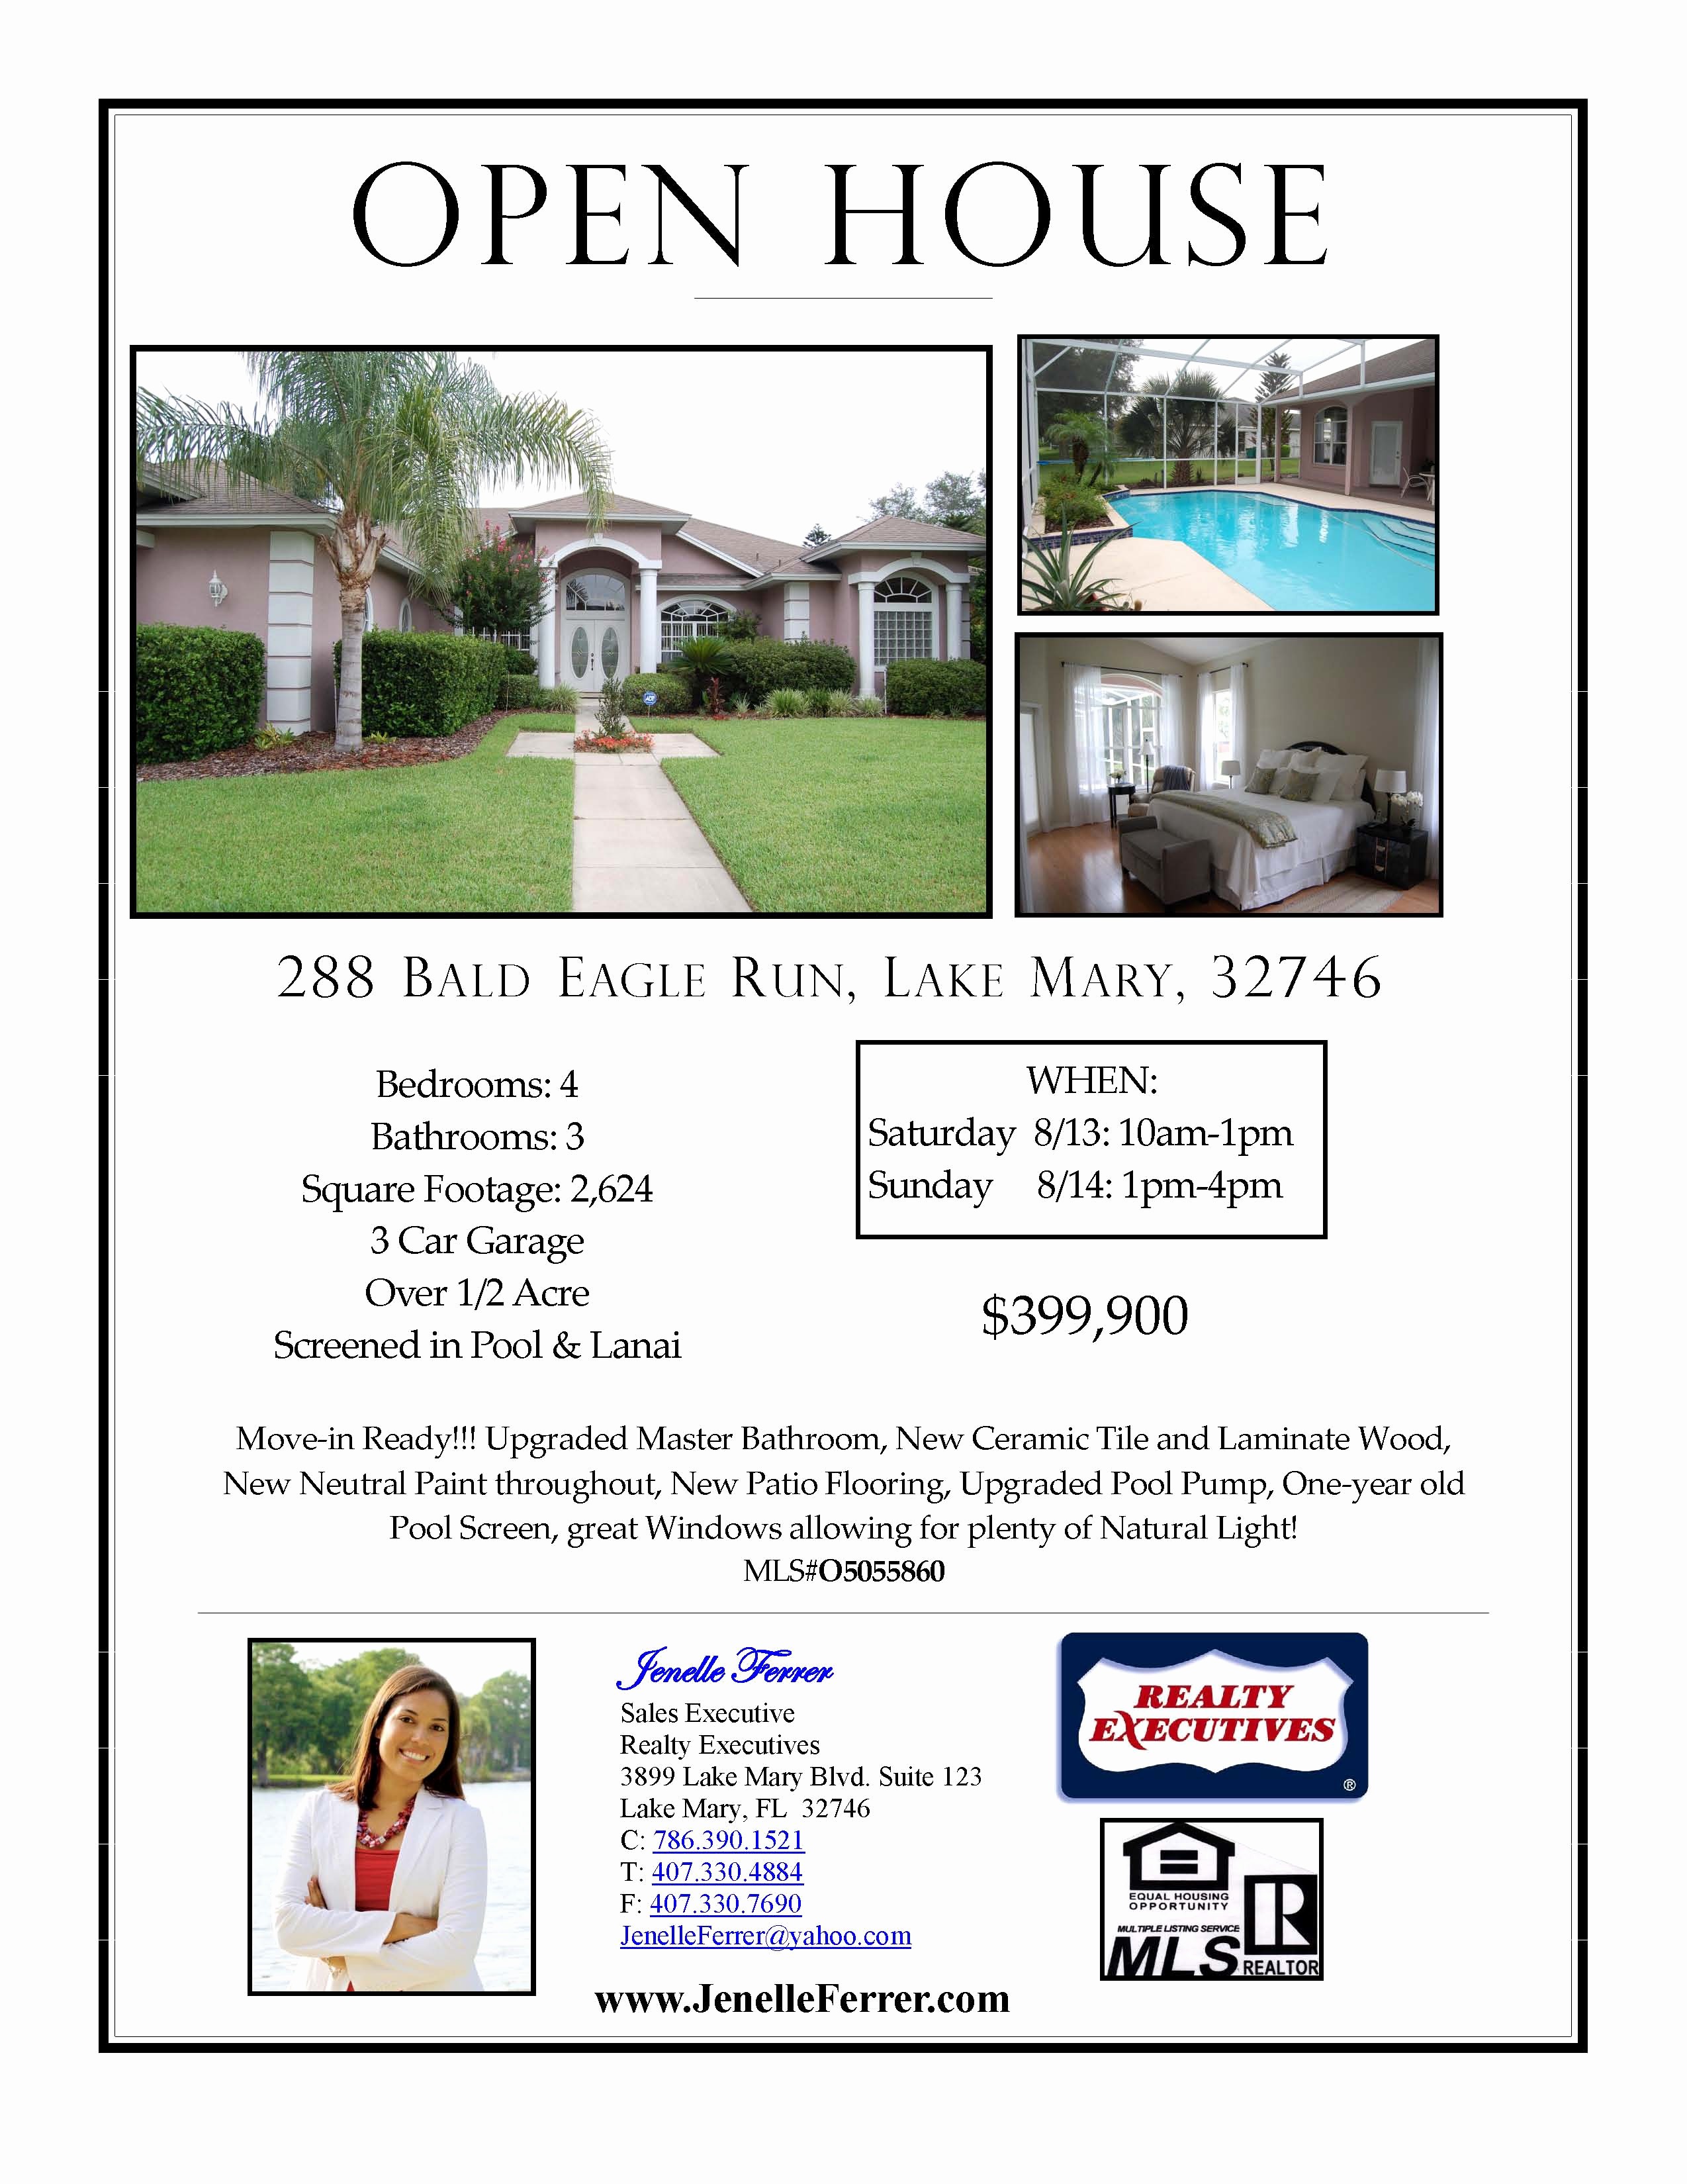 Open House Flyers for School Beautiful Lake Mary Fl Home